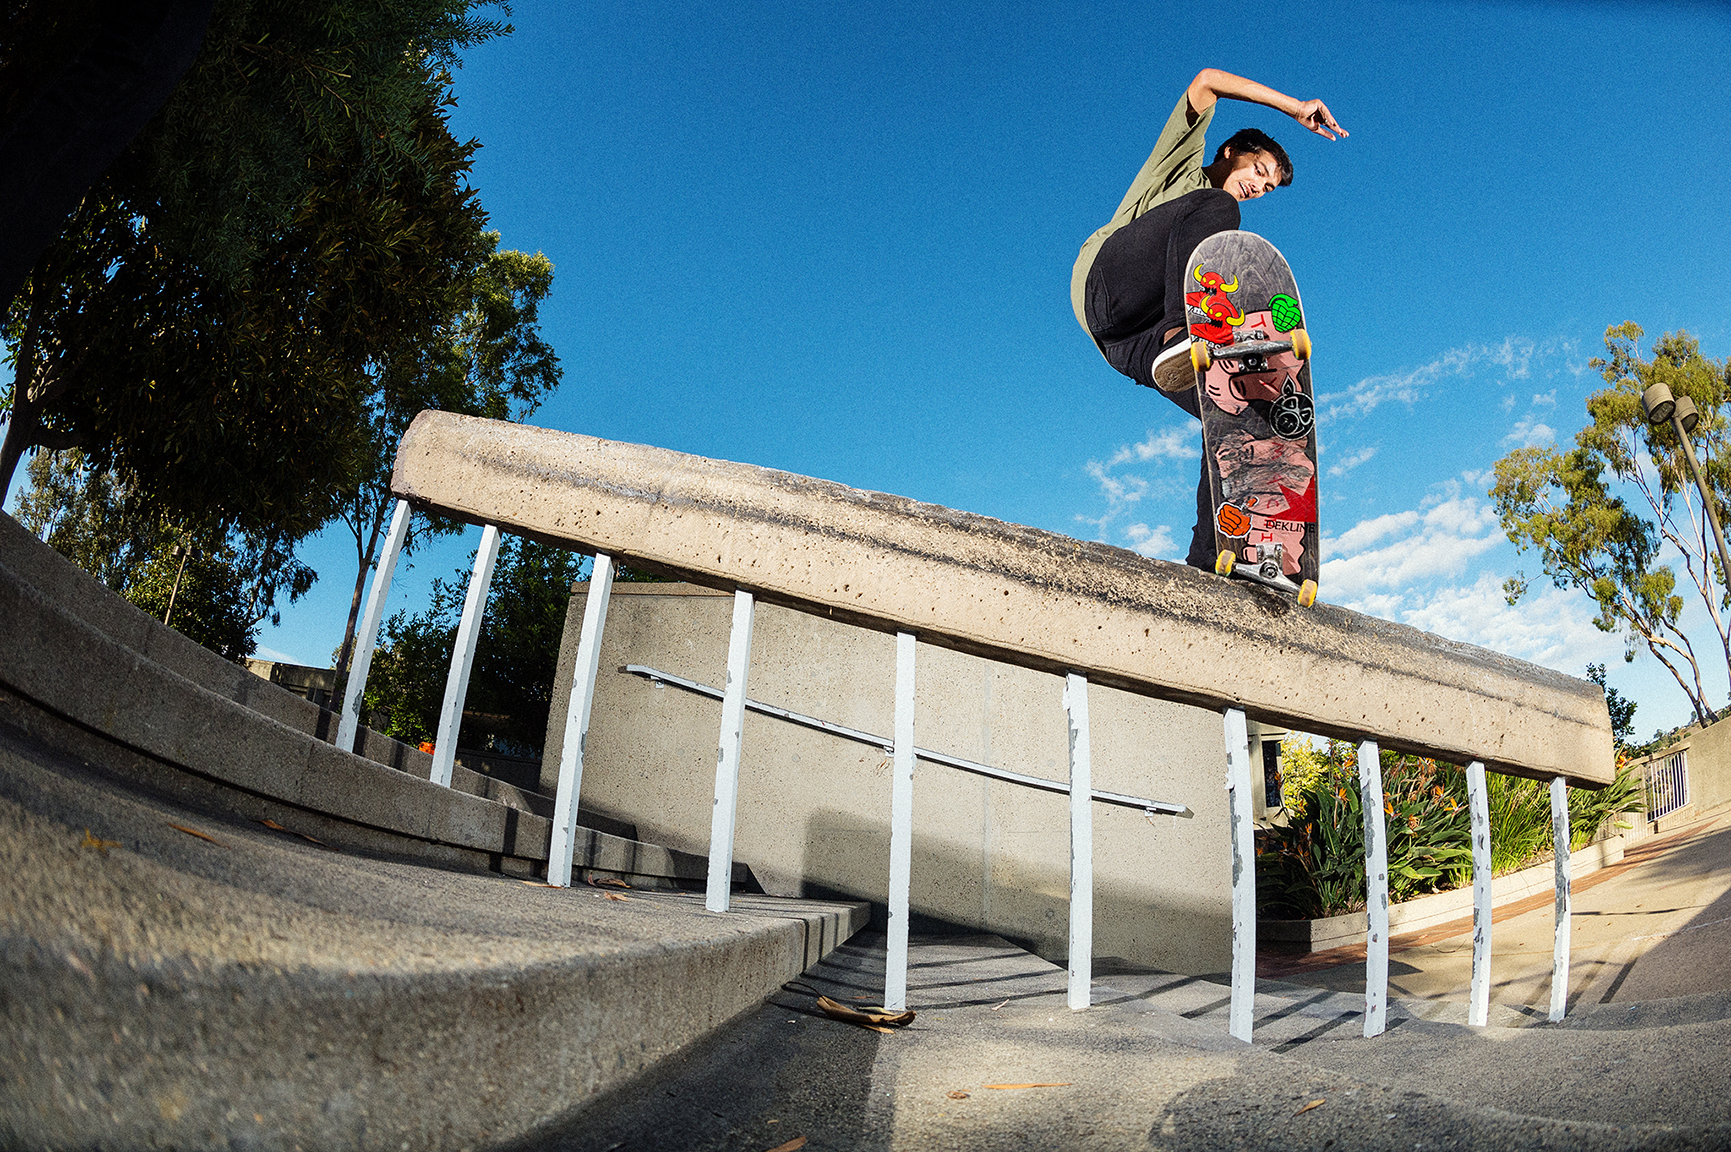 Jeremy Leabres, 180 switch crook